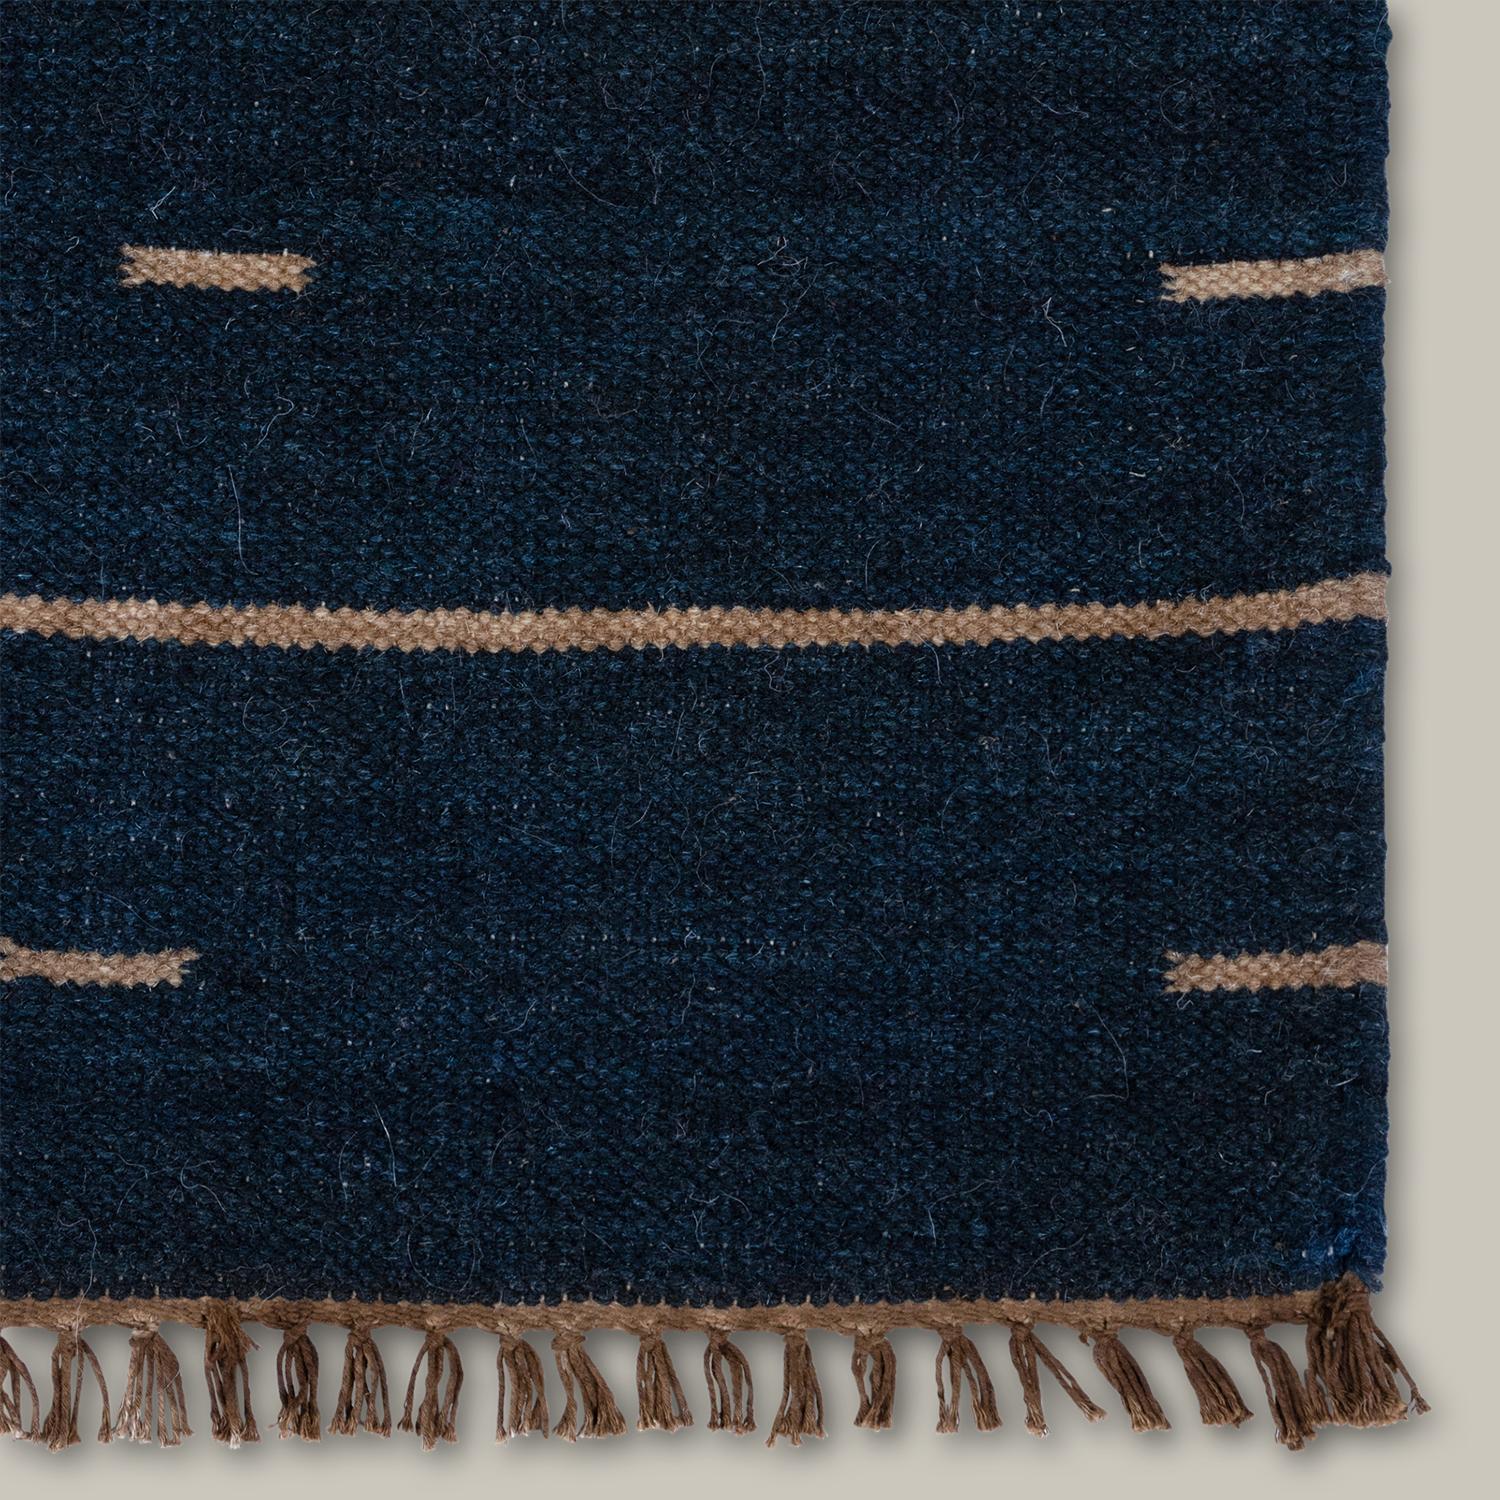 “Duar Dalao” Scandinavian Flatweave-Inspired Rug by Christiane Lemieux In New Condition For Sale In New York, NY